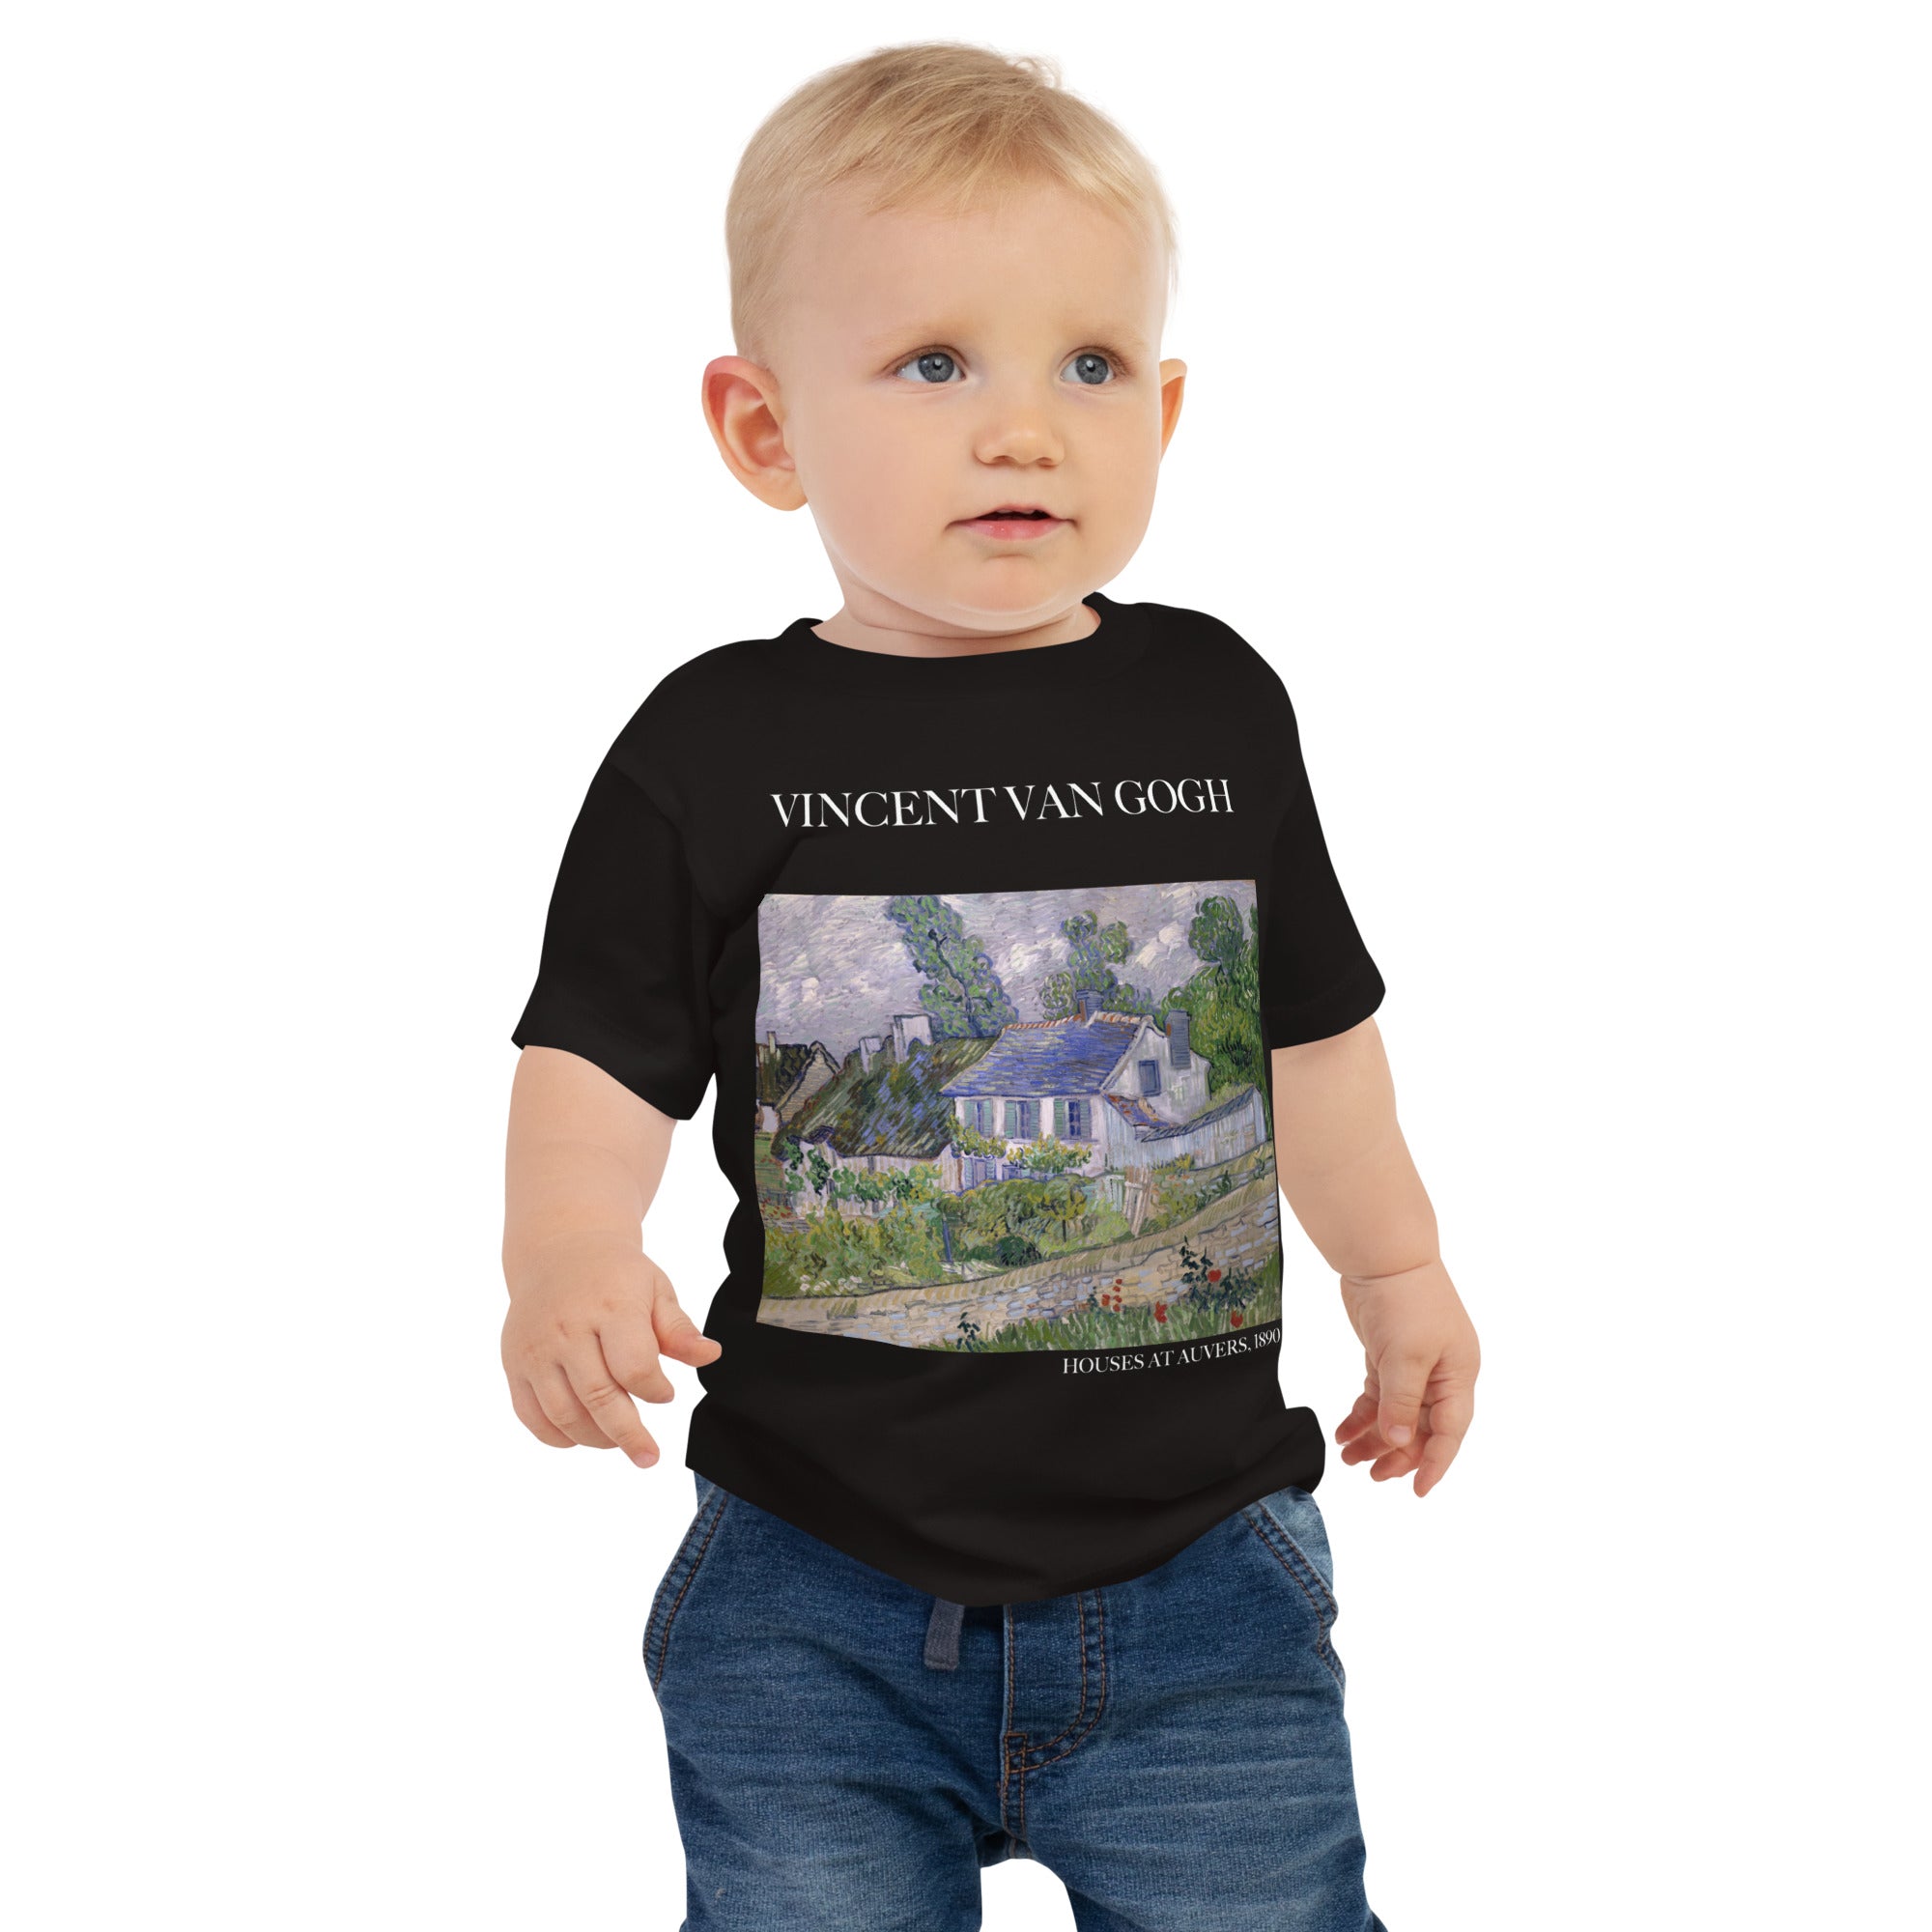 Vincent van Gogh 'Houses at Auvers' Famous Painting Baby Staple T-Shirt | Premium Baby Art Tee